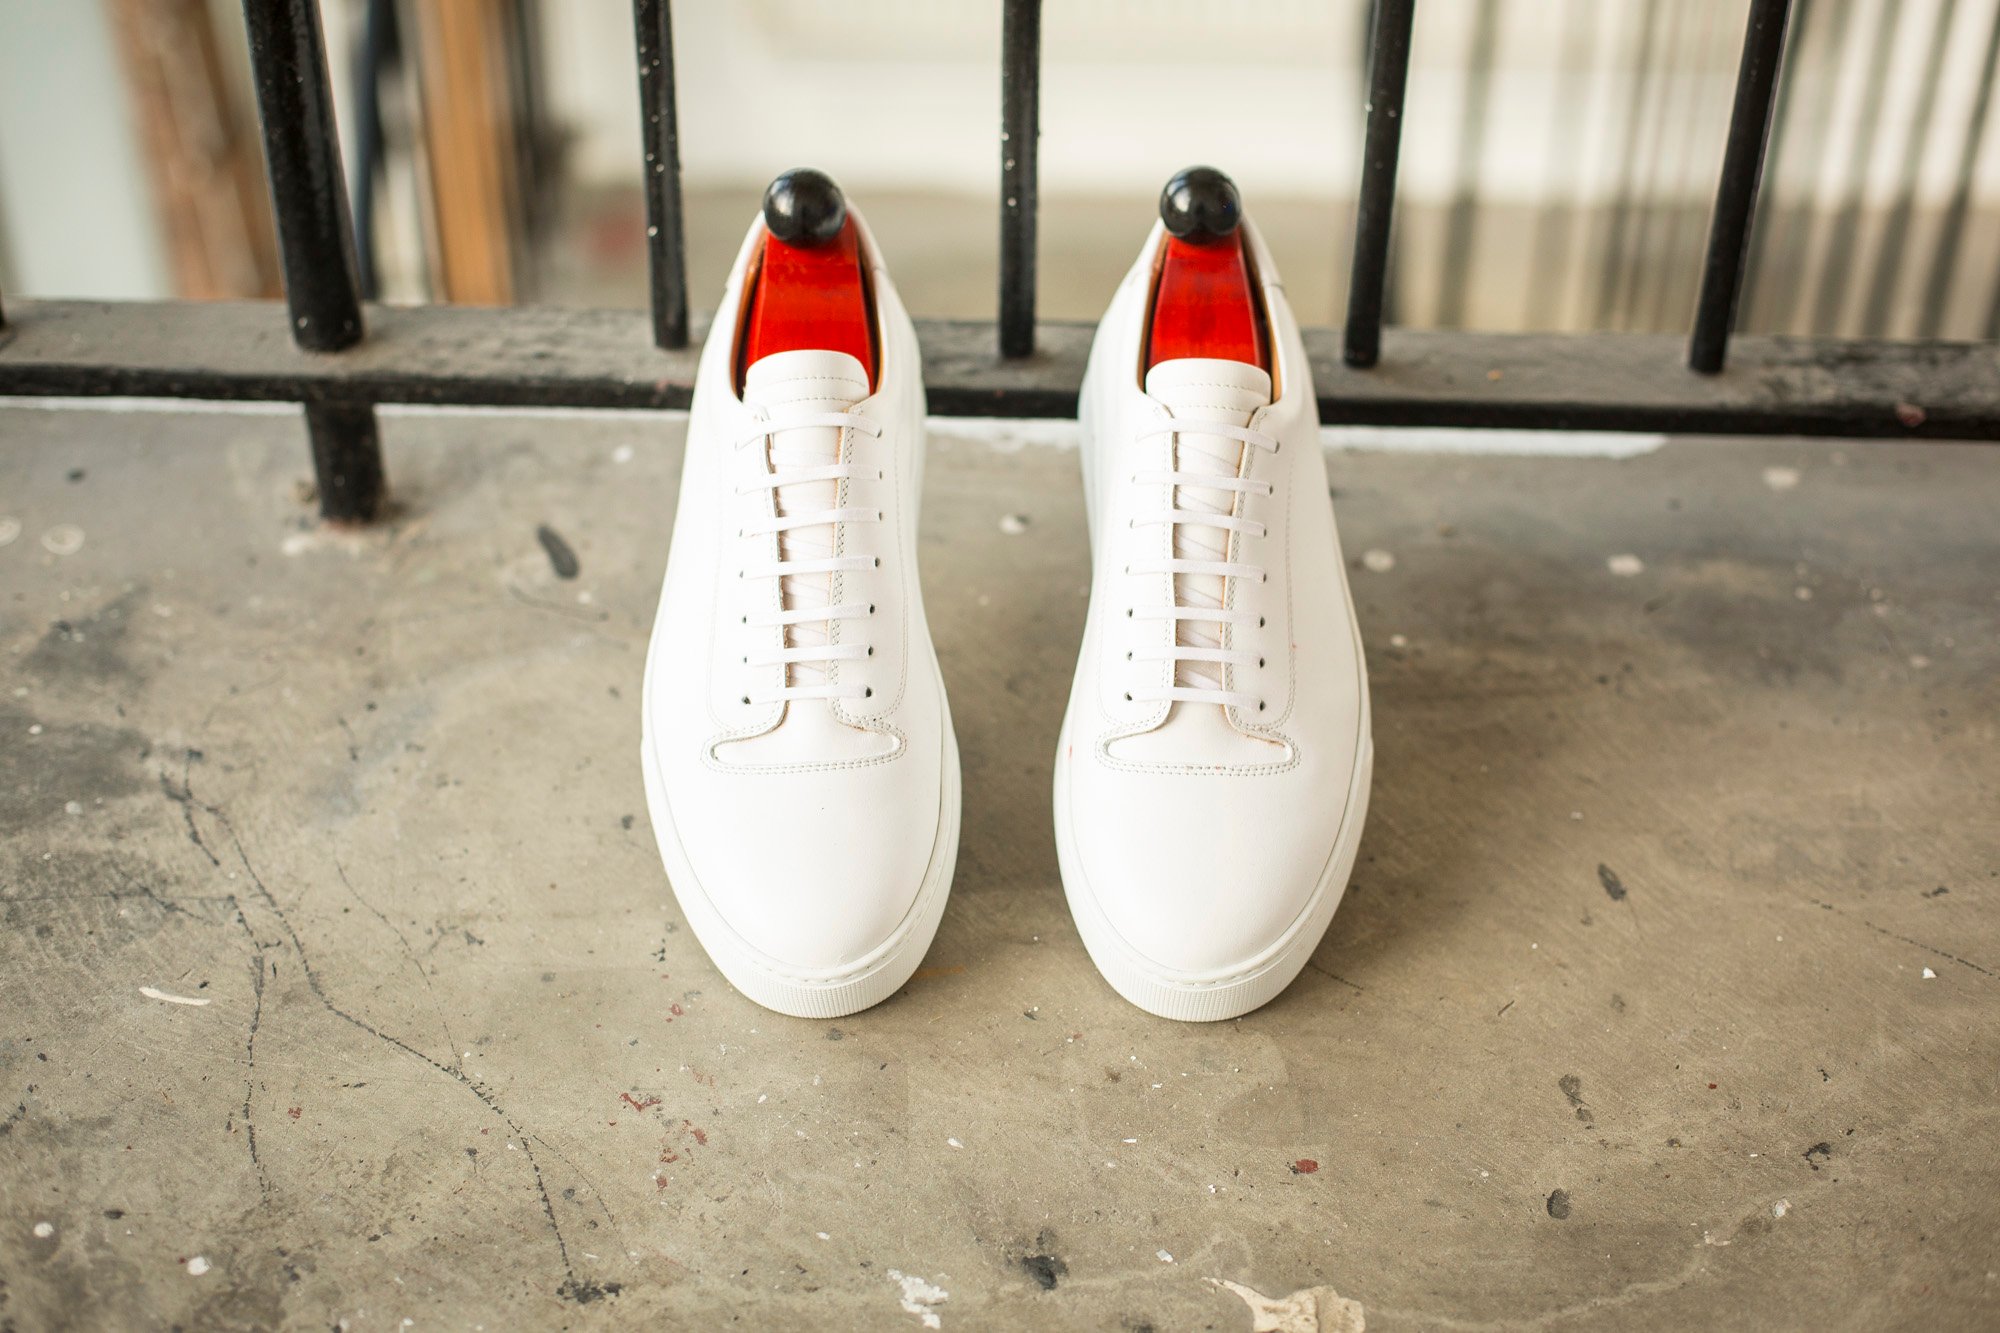 J.FitzPatrick Sneakers Round 1 - Now Available!